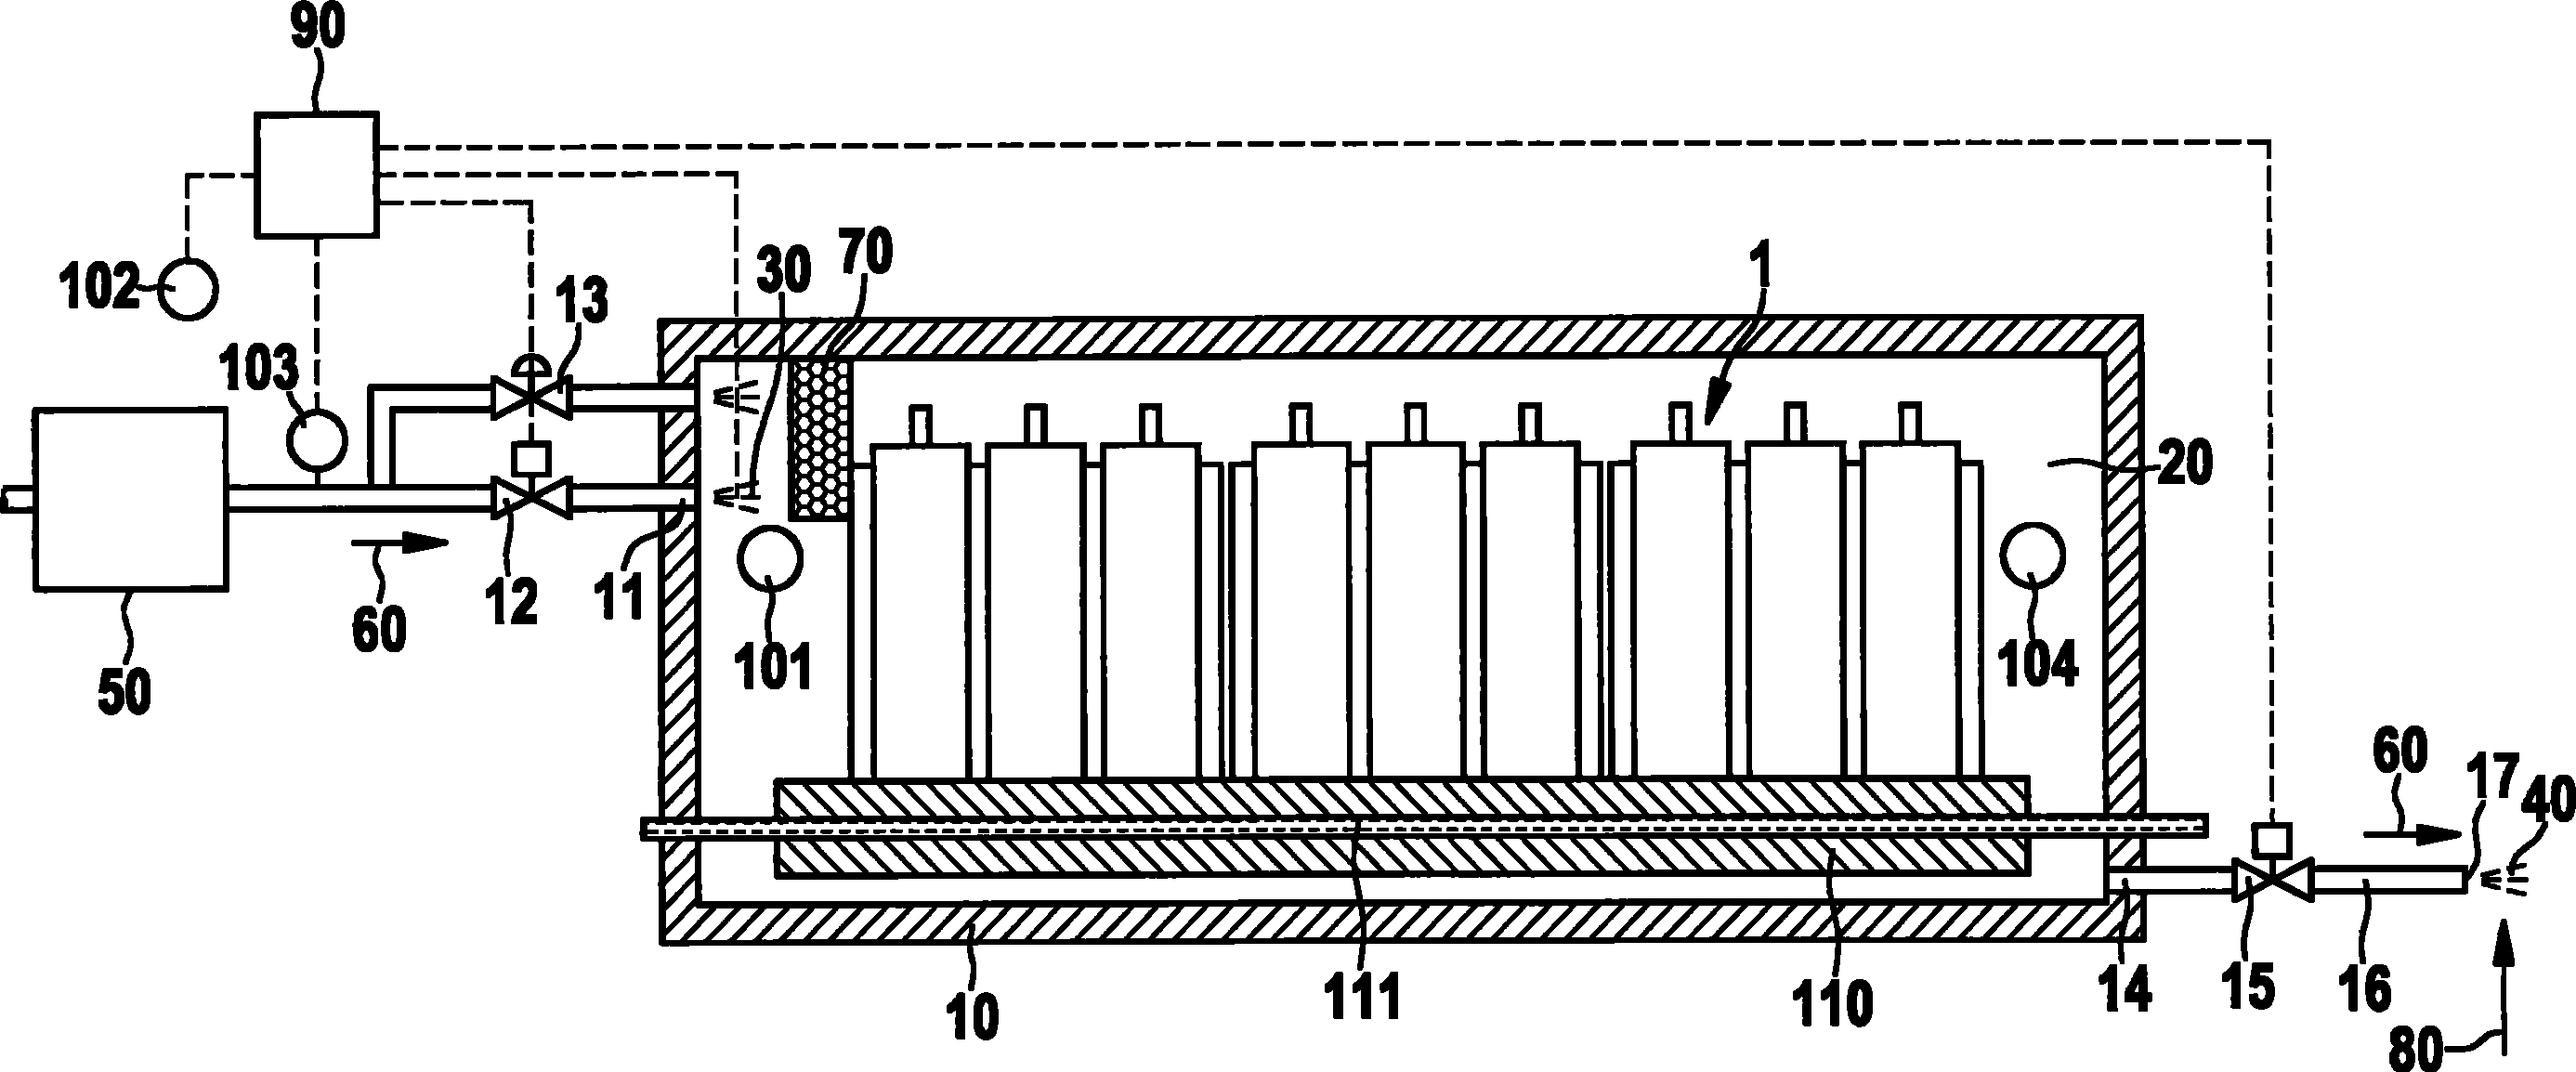 Method and device for decreasing moisture in a gas in a housing interior